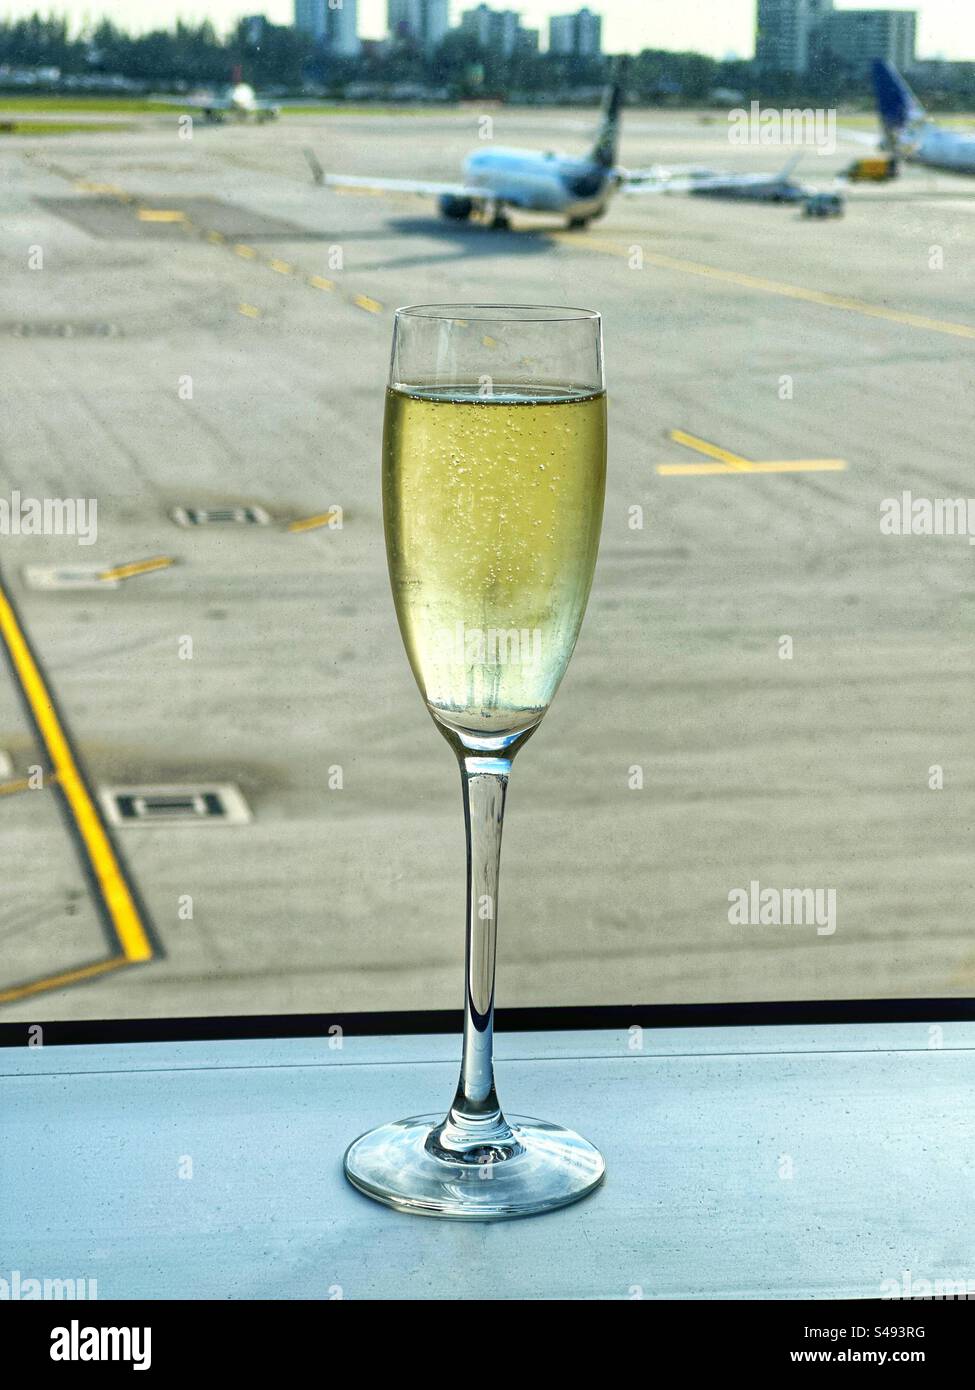 Flute glass of champagne on the window ledge of an airport business lounge. No people. Stock Photo